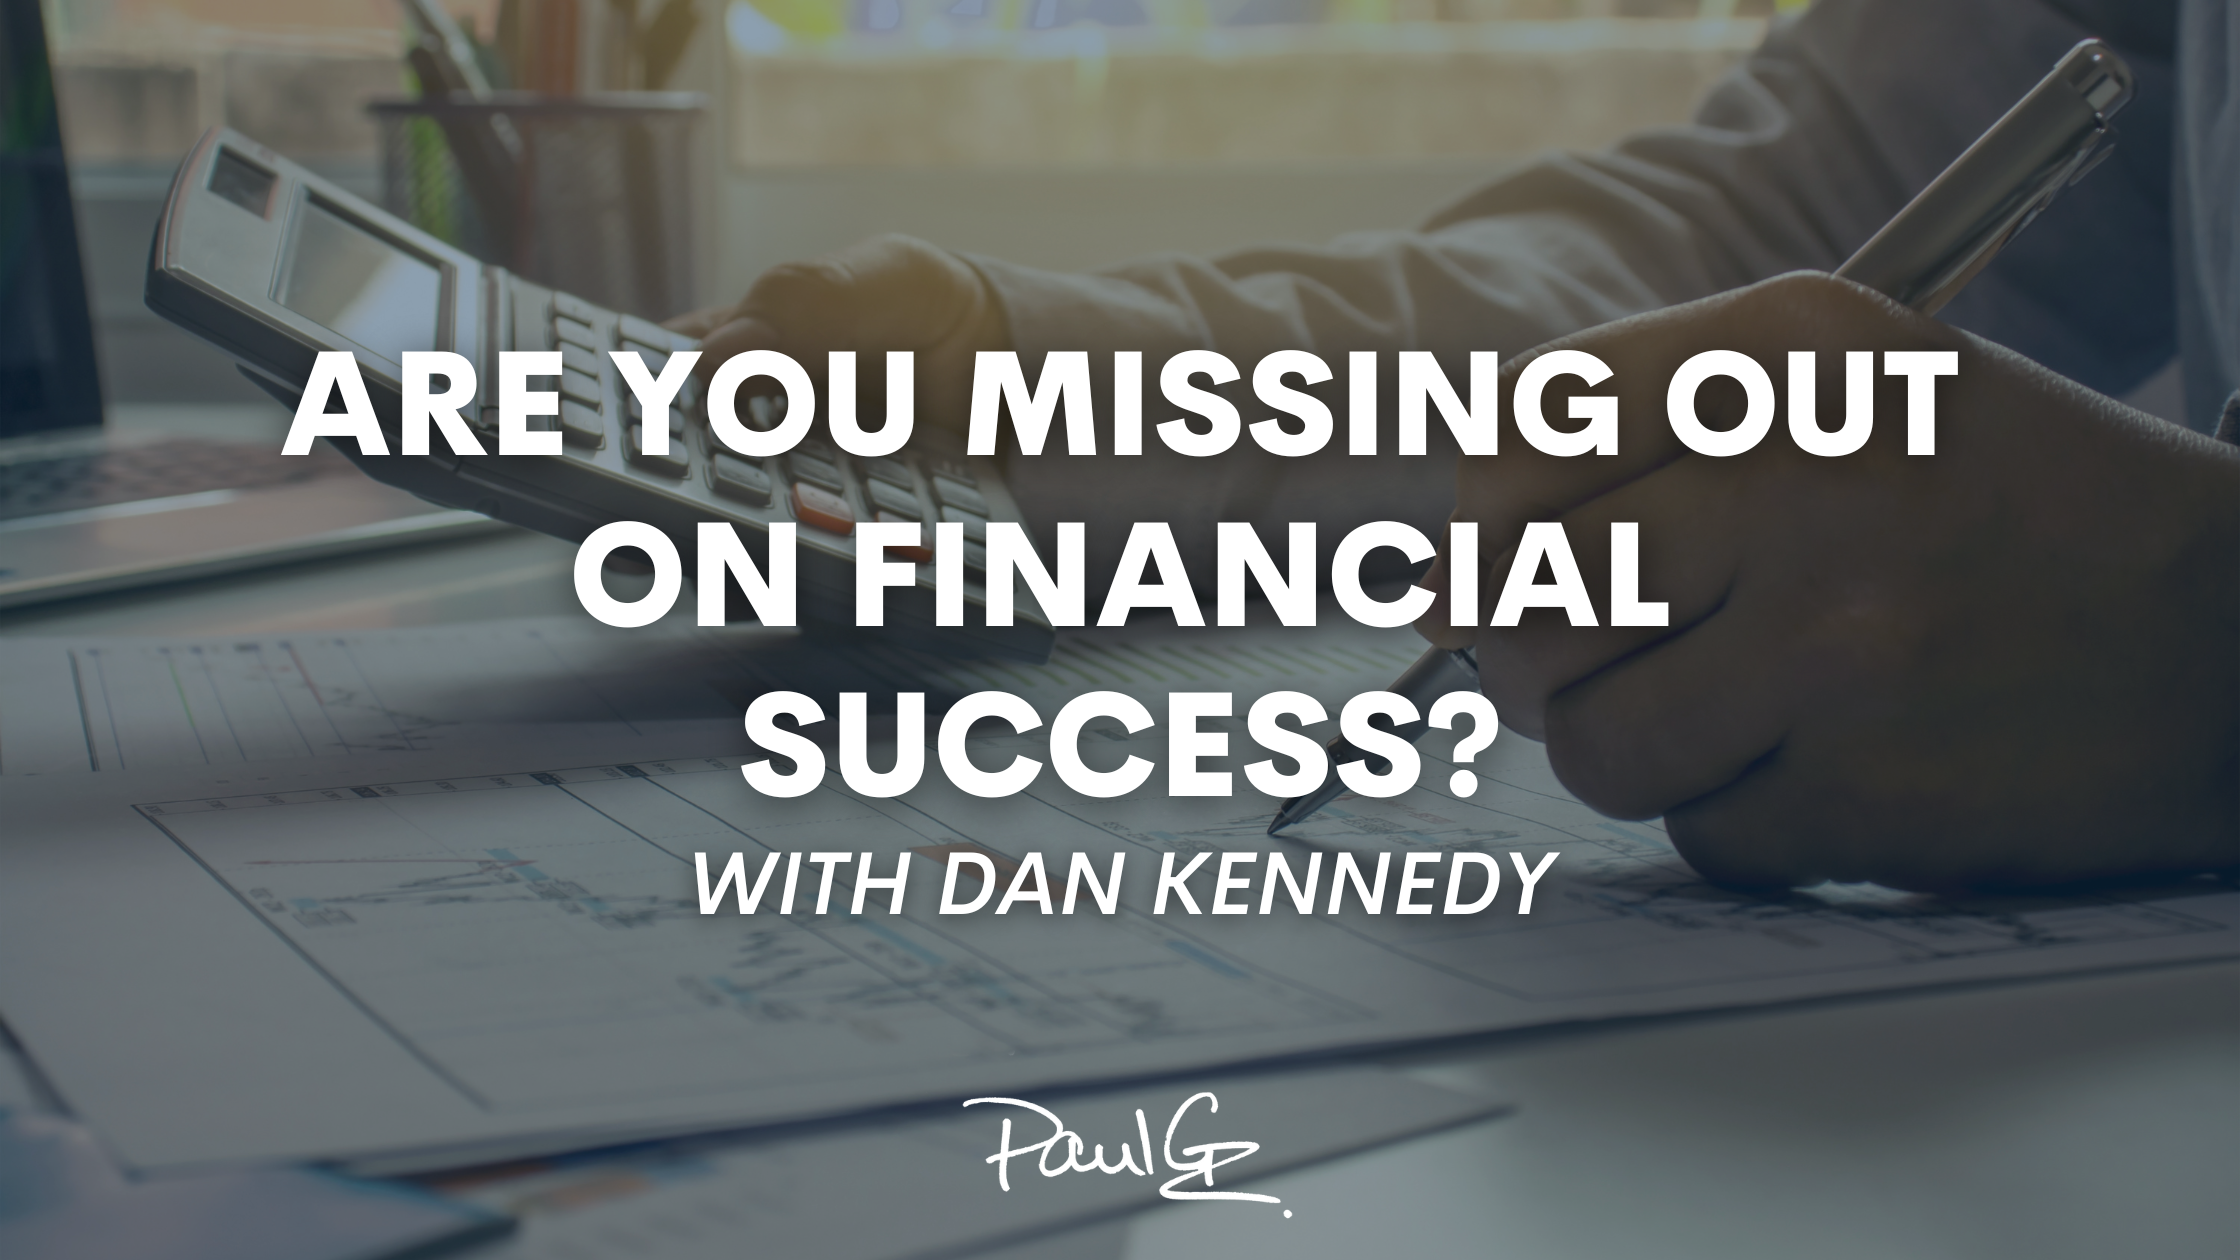 Are You Missing Out on Financial Success? With Dan Kennedy